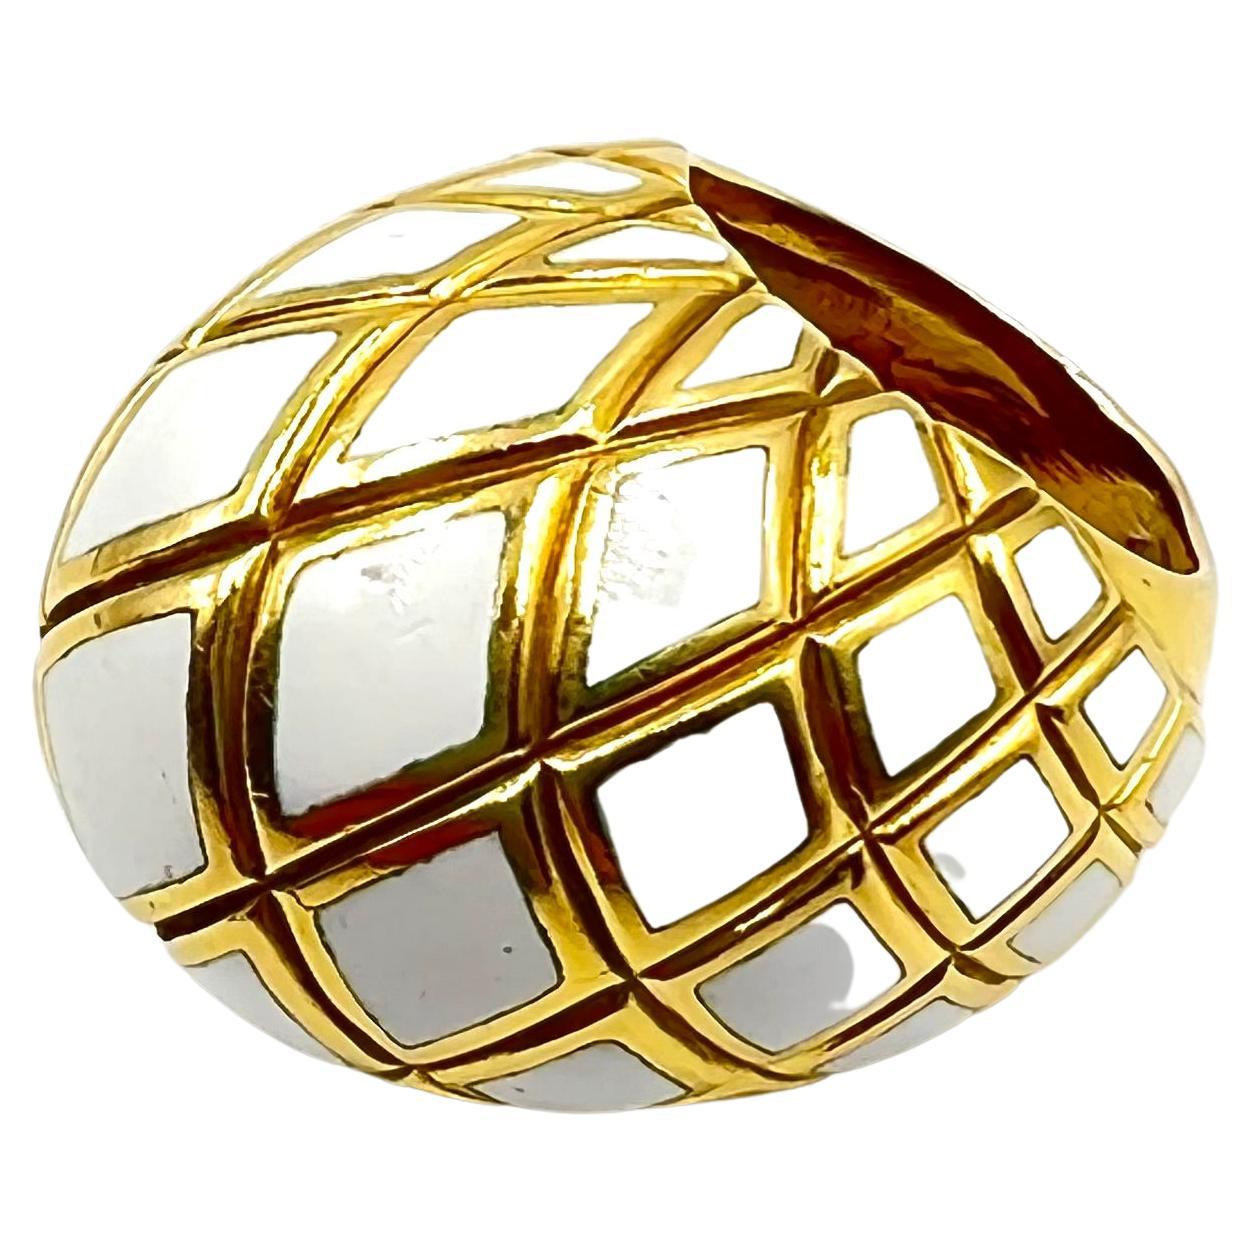 18kt yellow gold dome ring with a criss-cross design accented by white enamel.  Stylish dome top measuring W.22.82mm and tapering to 6.72mm at the shank.  Height of dome is approximately 18.5mm.  Hollowed out interior allows for comfortable wear. 